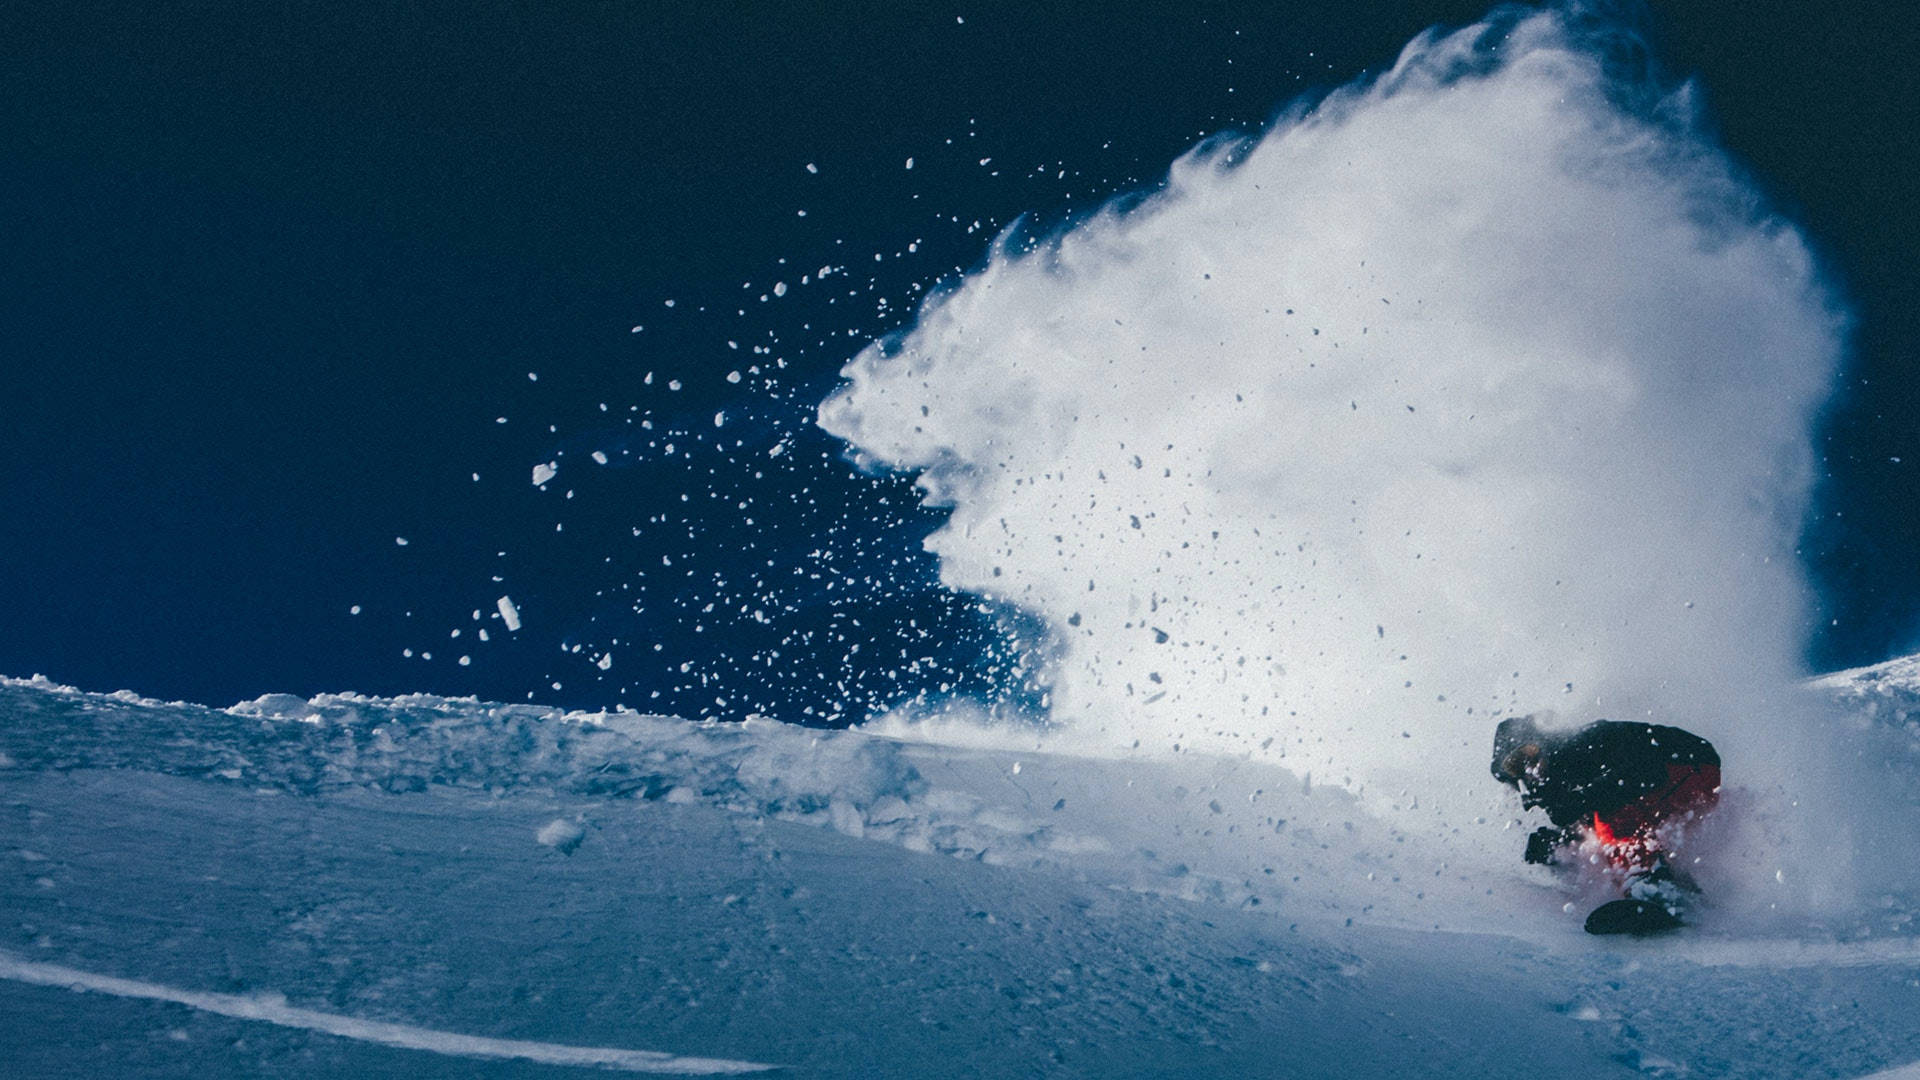 Snowboarding With Flying Snow Wallpaper